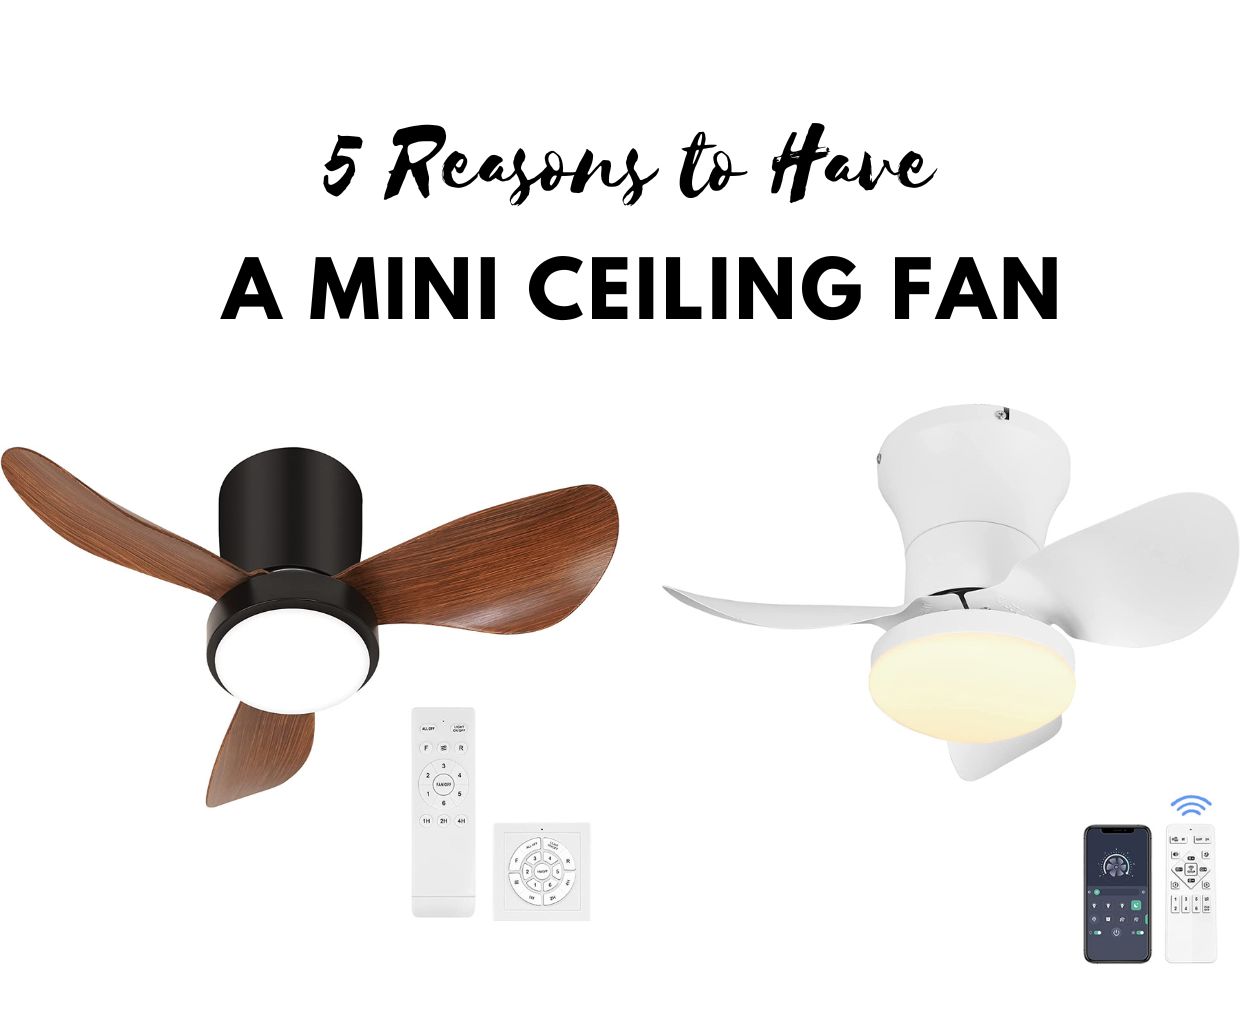 Top 5 Reasons To Have A Mini Ceiling Fan
